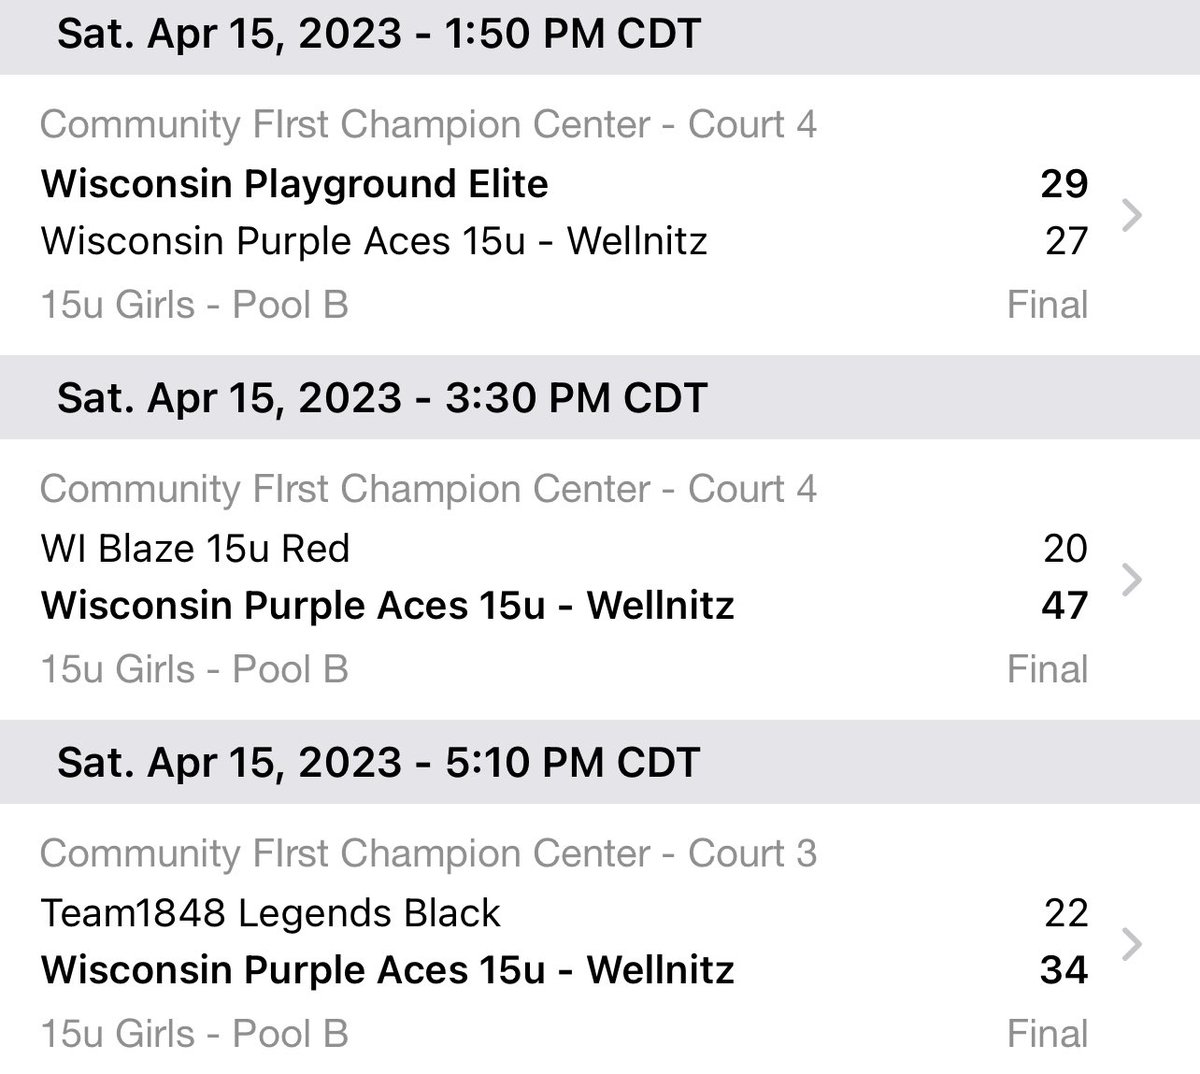 Productive day in the gym yesterday‼️

💜16u National went 2-1
💜15u National went 3-0
💜15u Wellnitz went 2-1

Bracket play begins today!

🏆Championship Sunday

💜♠️#AcesEarnIt